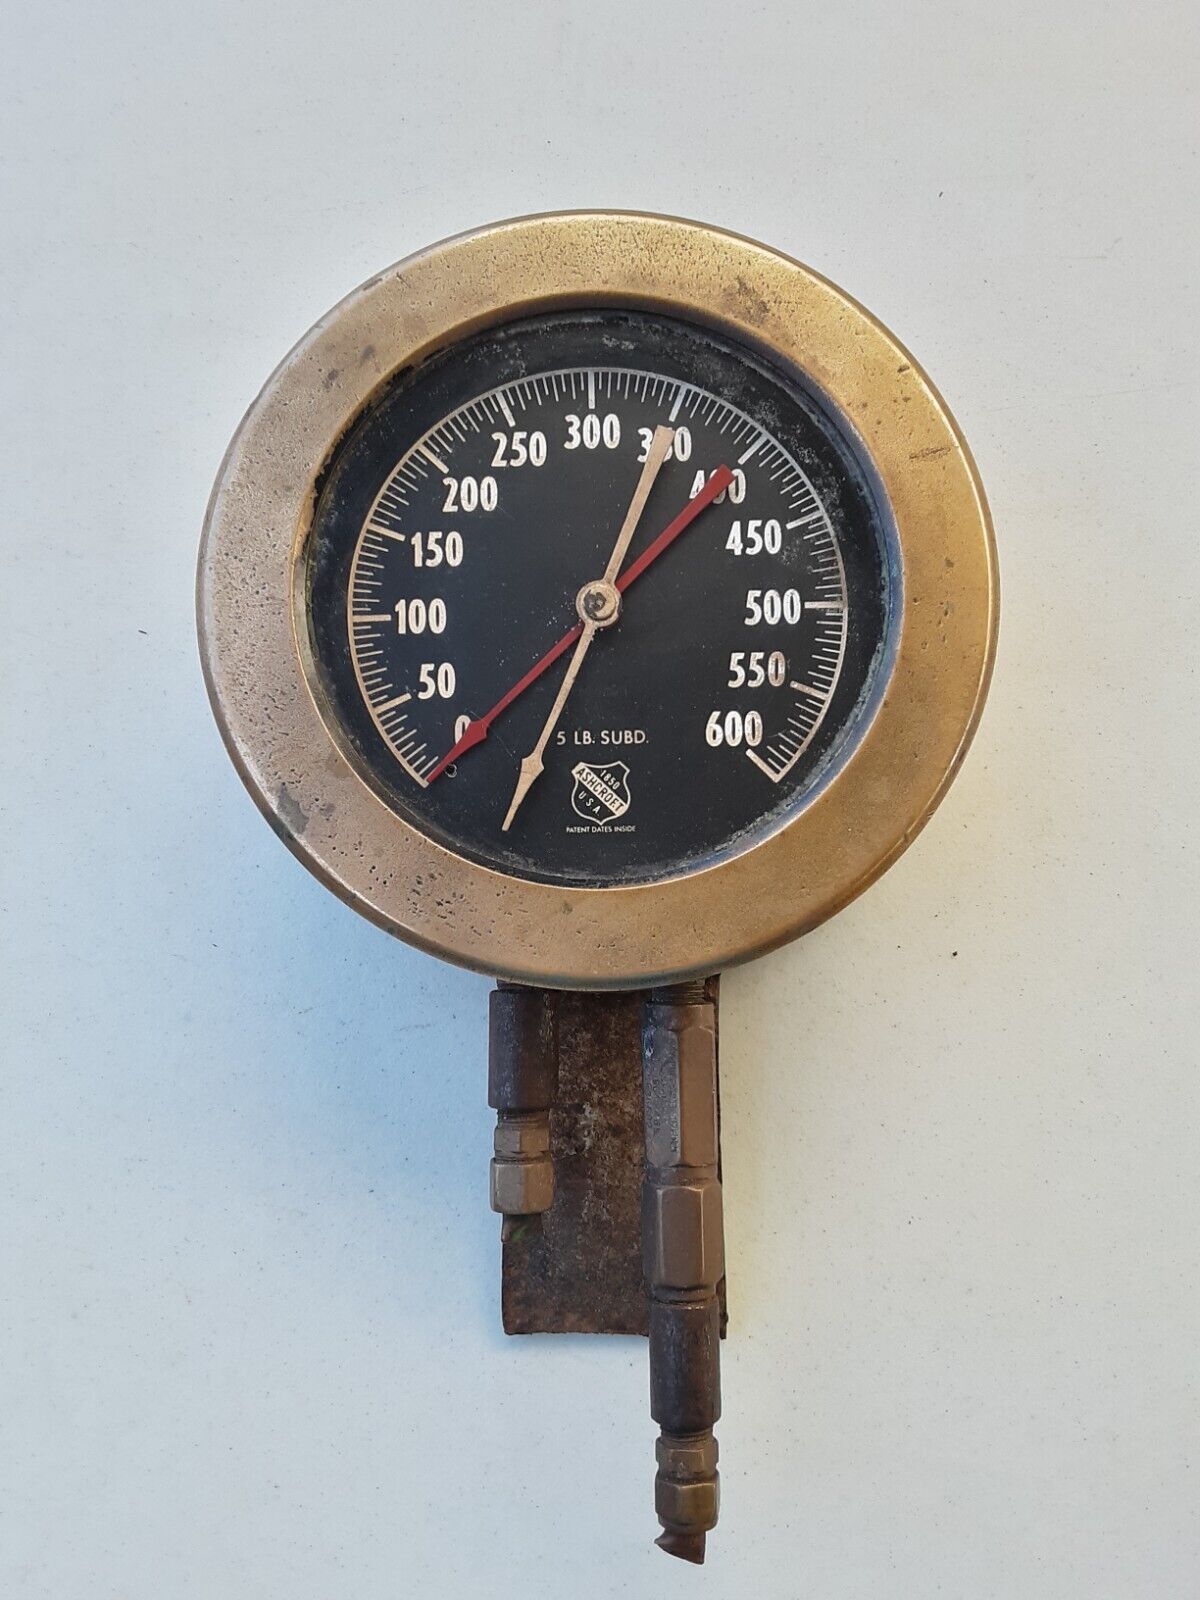 Very Rare Antique Steam Gauge With Double Pressure  And Double Hands  600 PSI